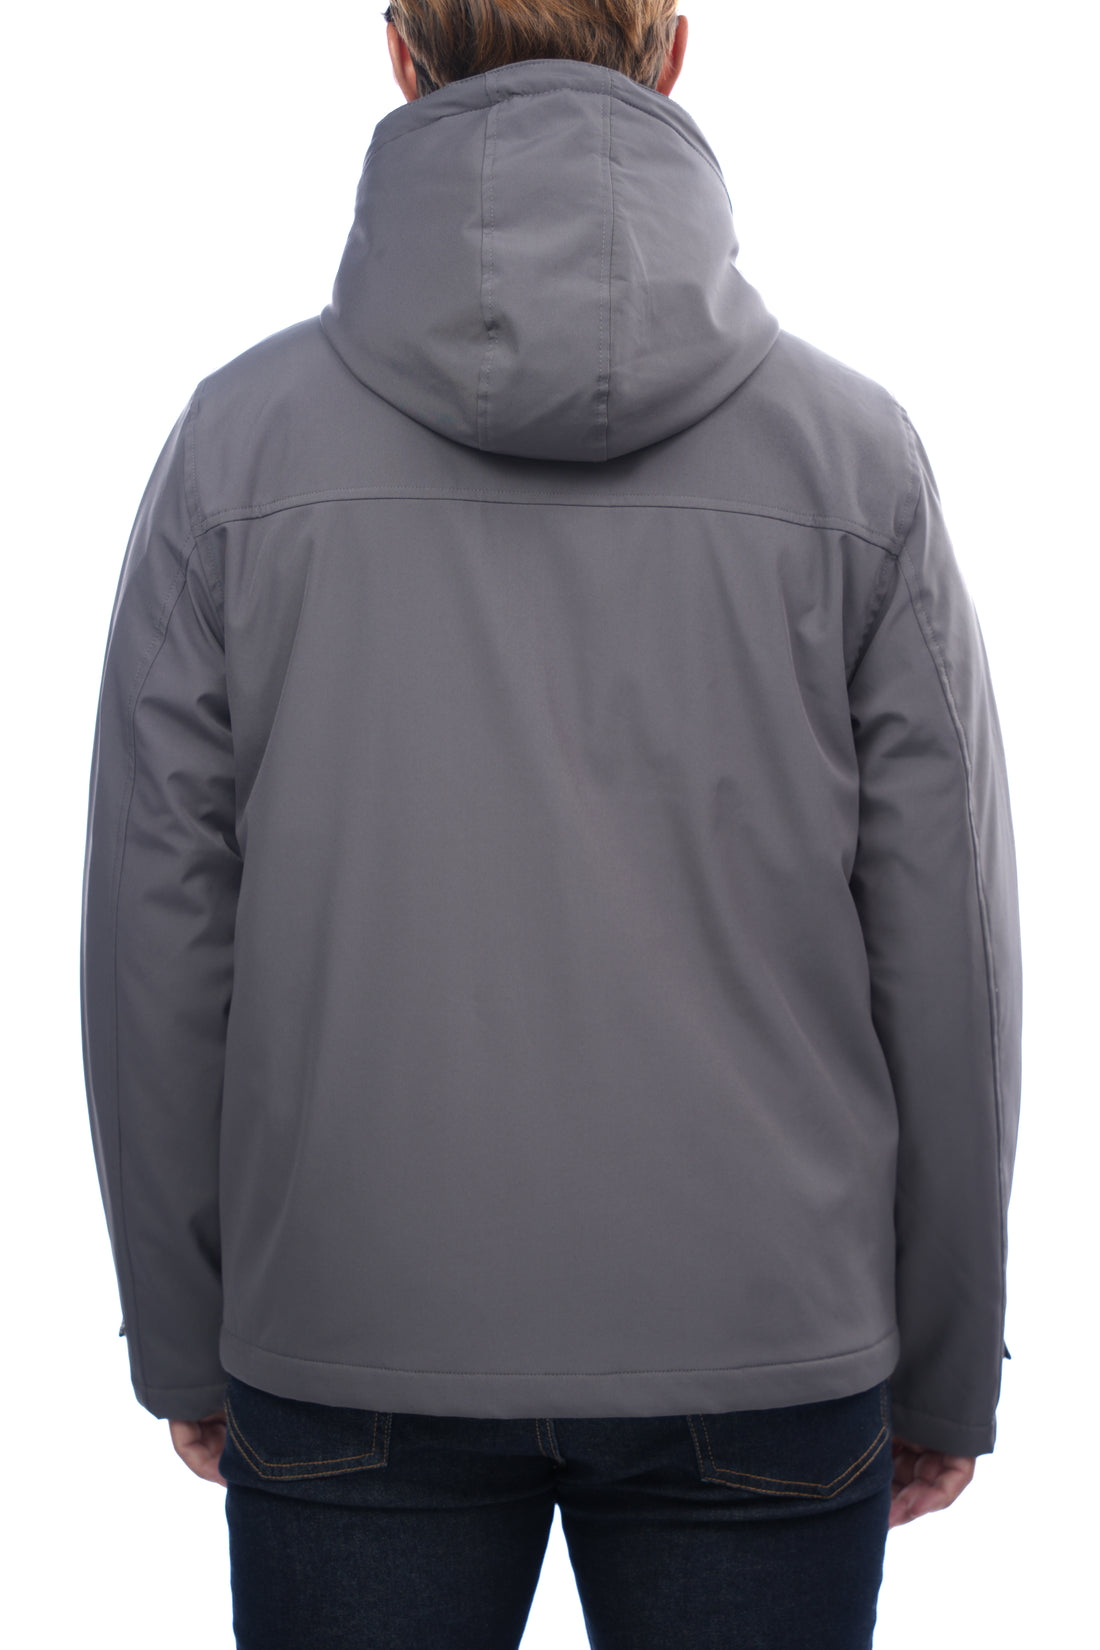 THE CHINOOK HOODED SOFTSHELL